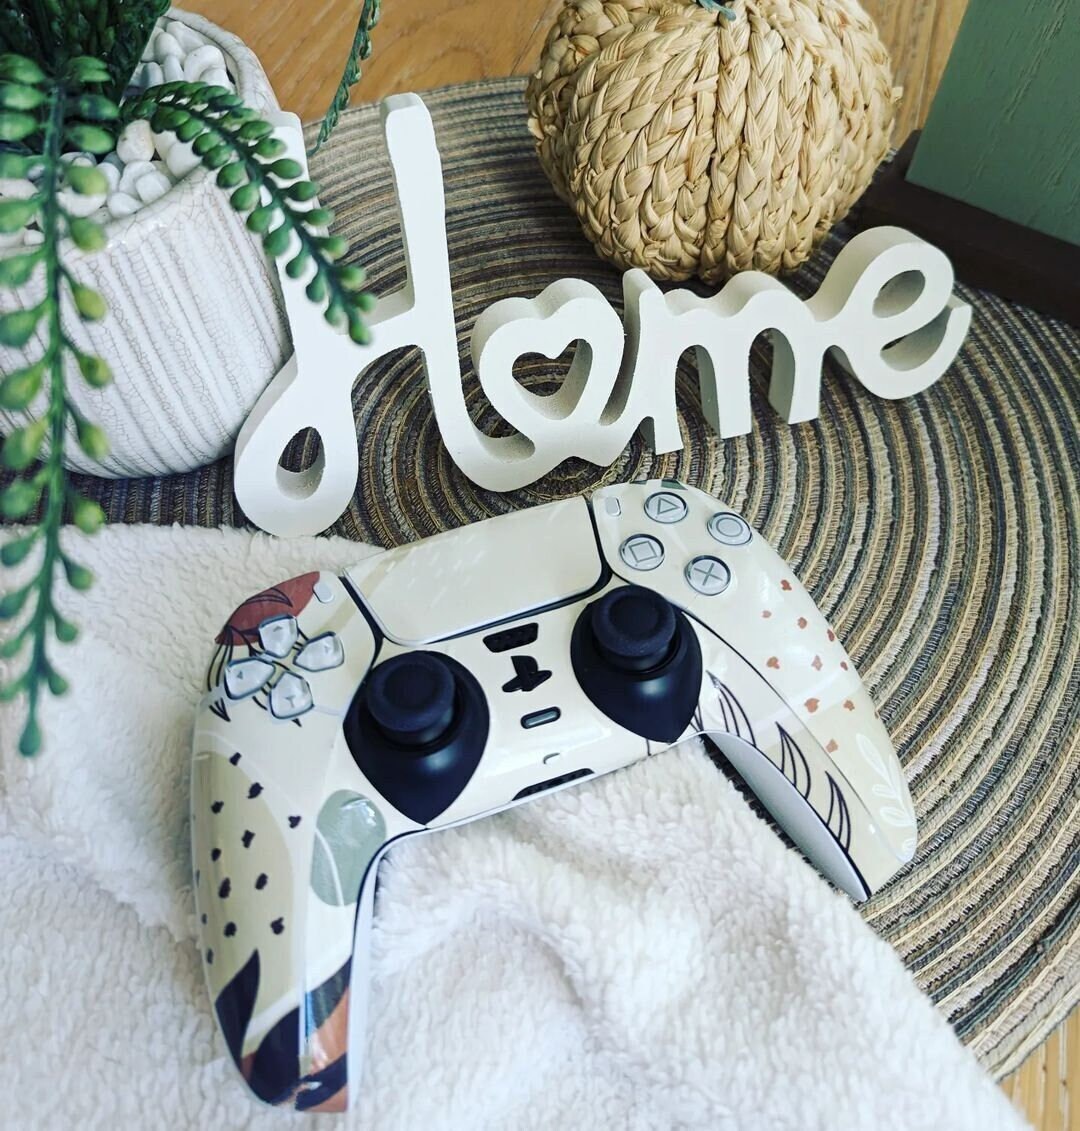 decided to personalize my PS5 controller and I'm not disappointed